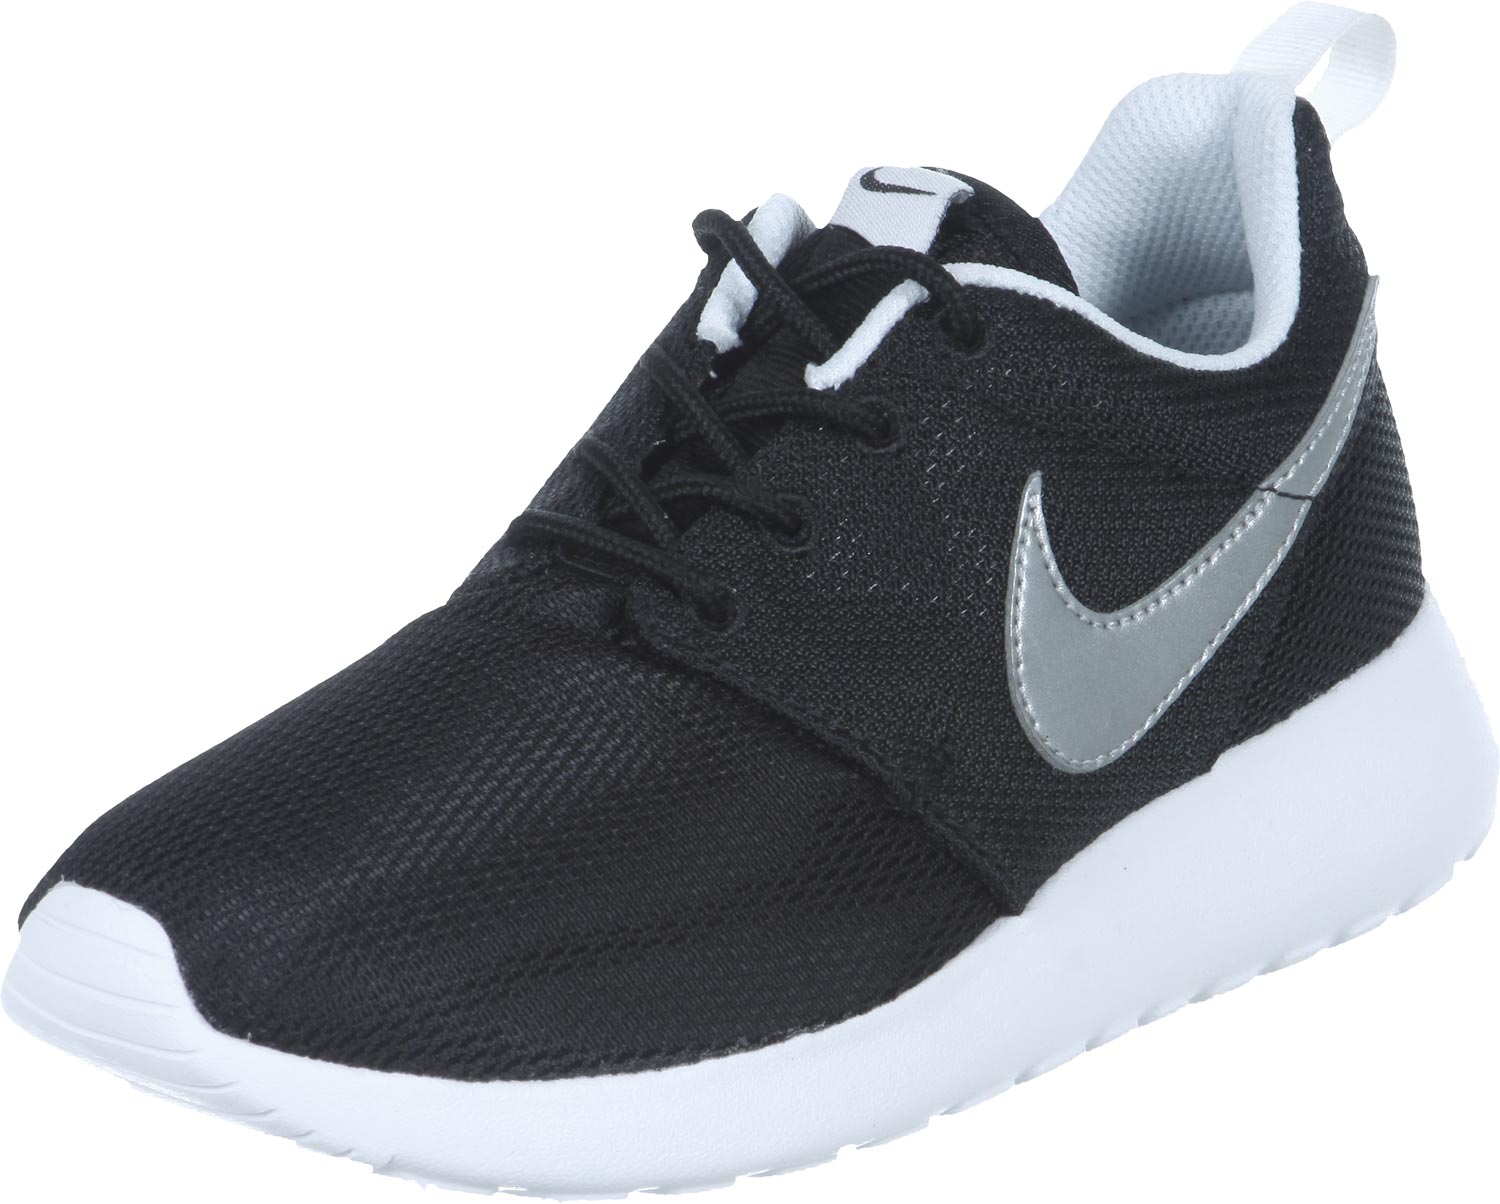 nike roshe run youth gs chaussures noir argent, Nike Roshe Run W Chaussures Rose Argent